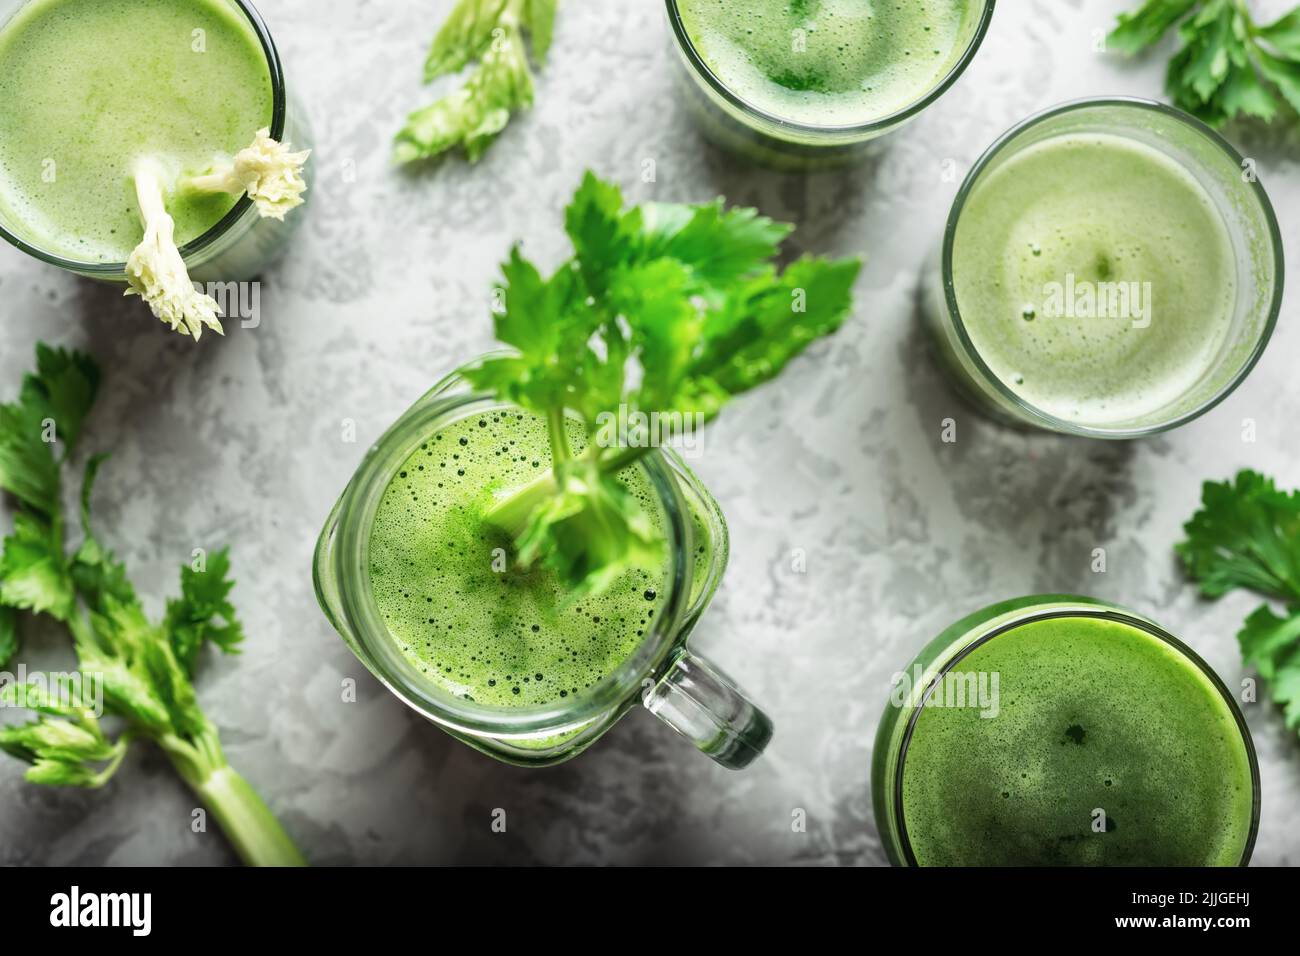 Celery fresh green juice in different glasses on rusty grey table. Healthy vegetarian food background Stock Photo